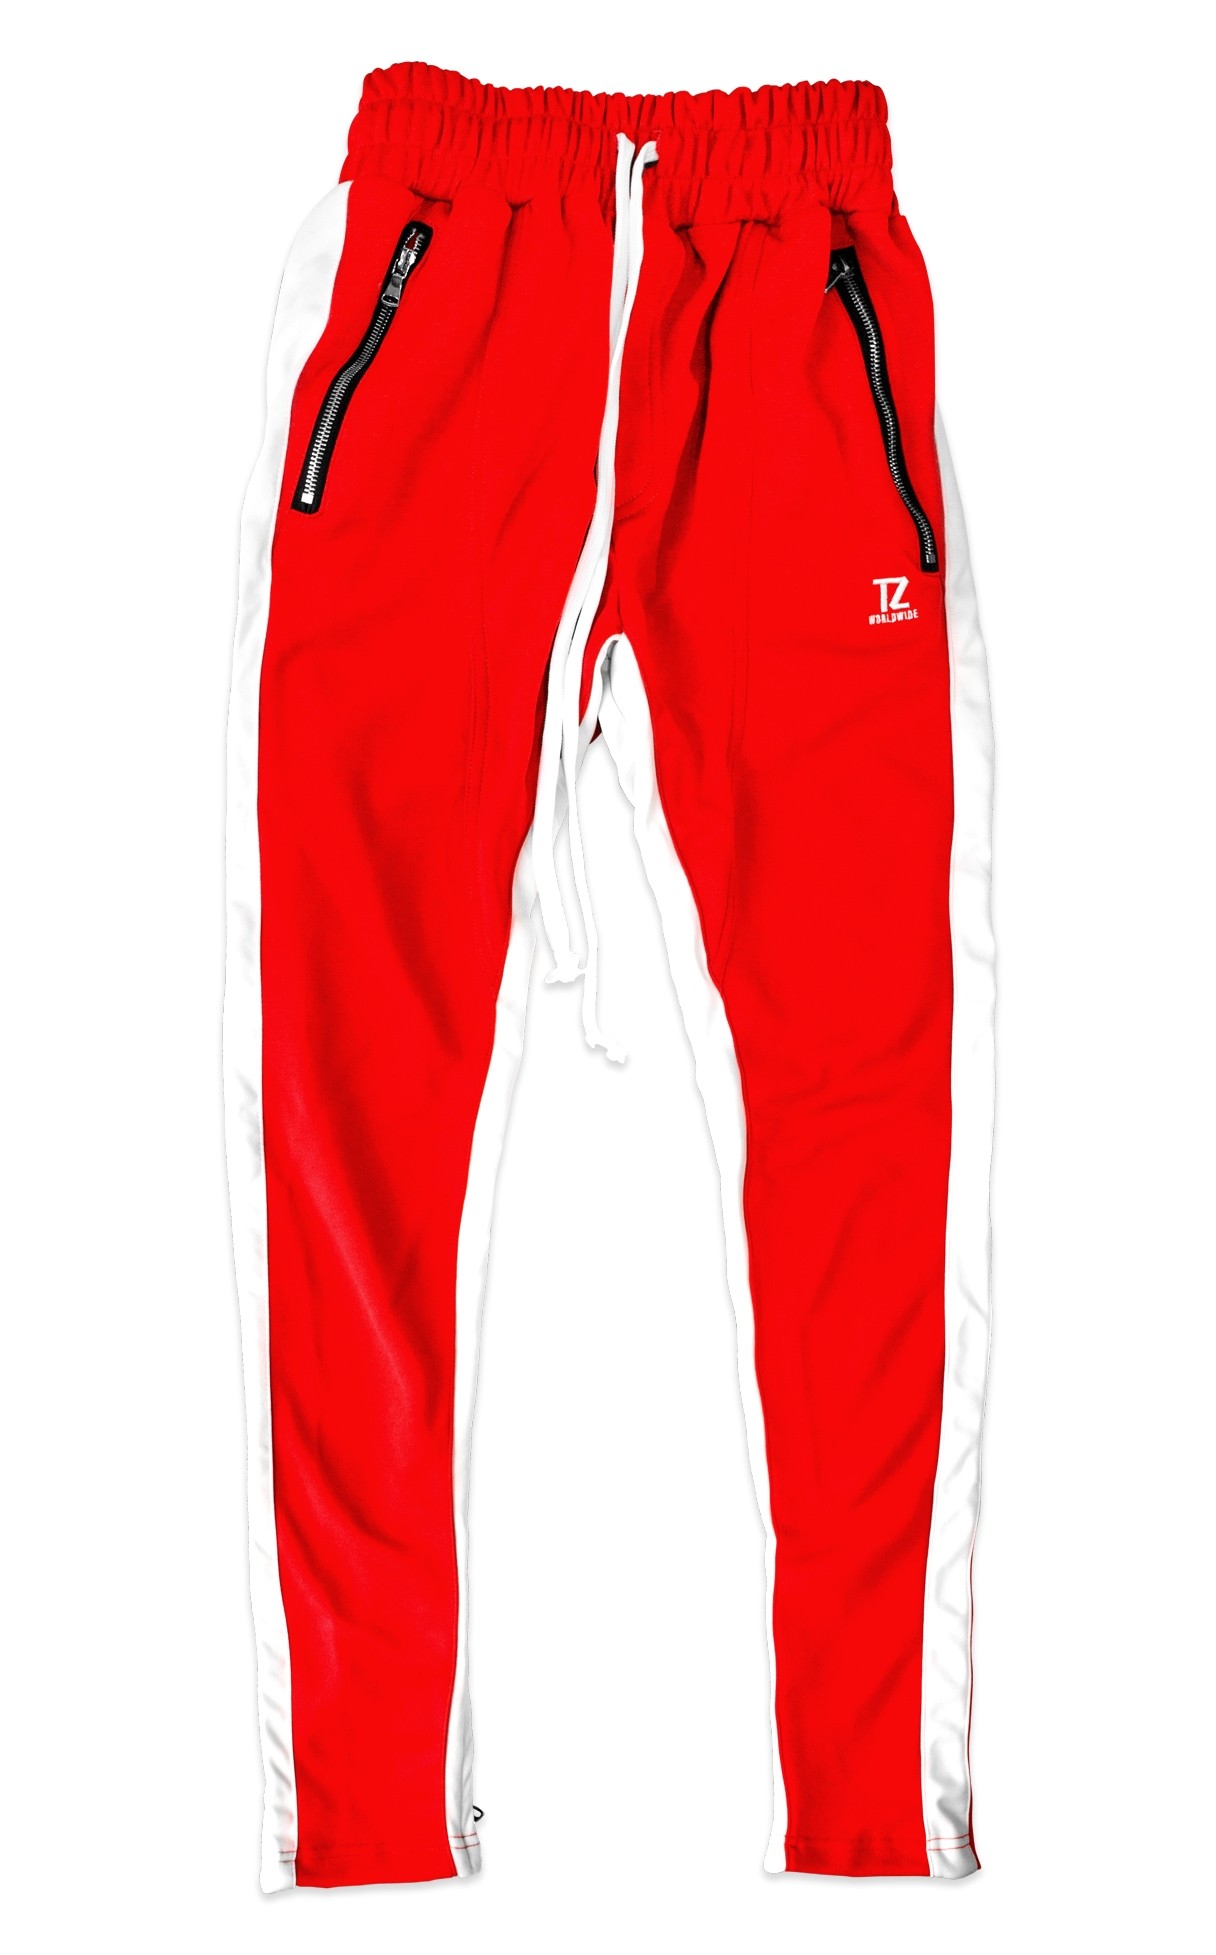 TZ TRACK PANTS (RED/WHITE) Size L